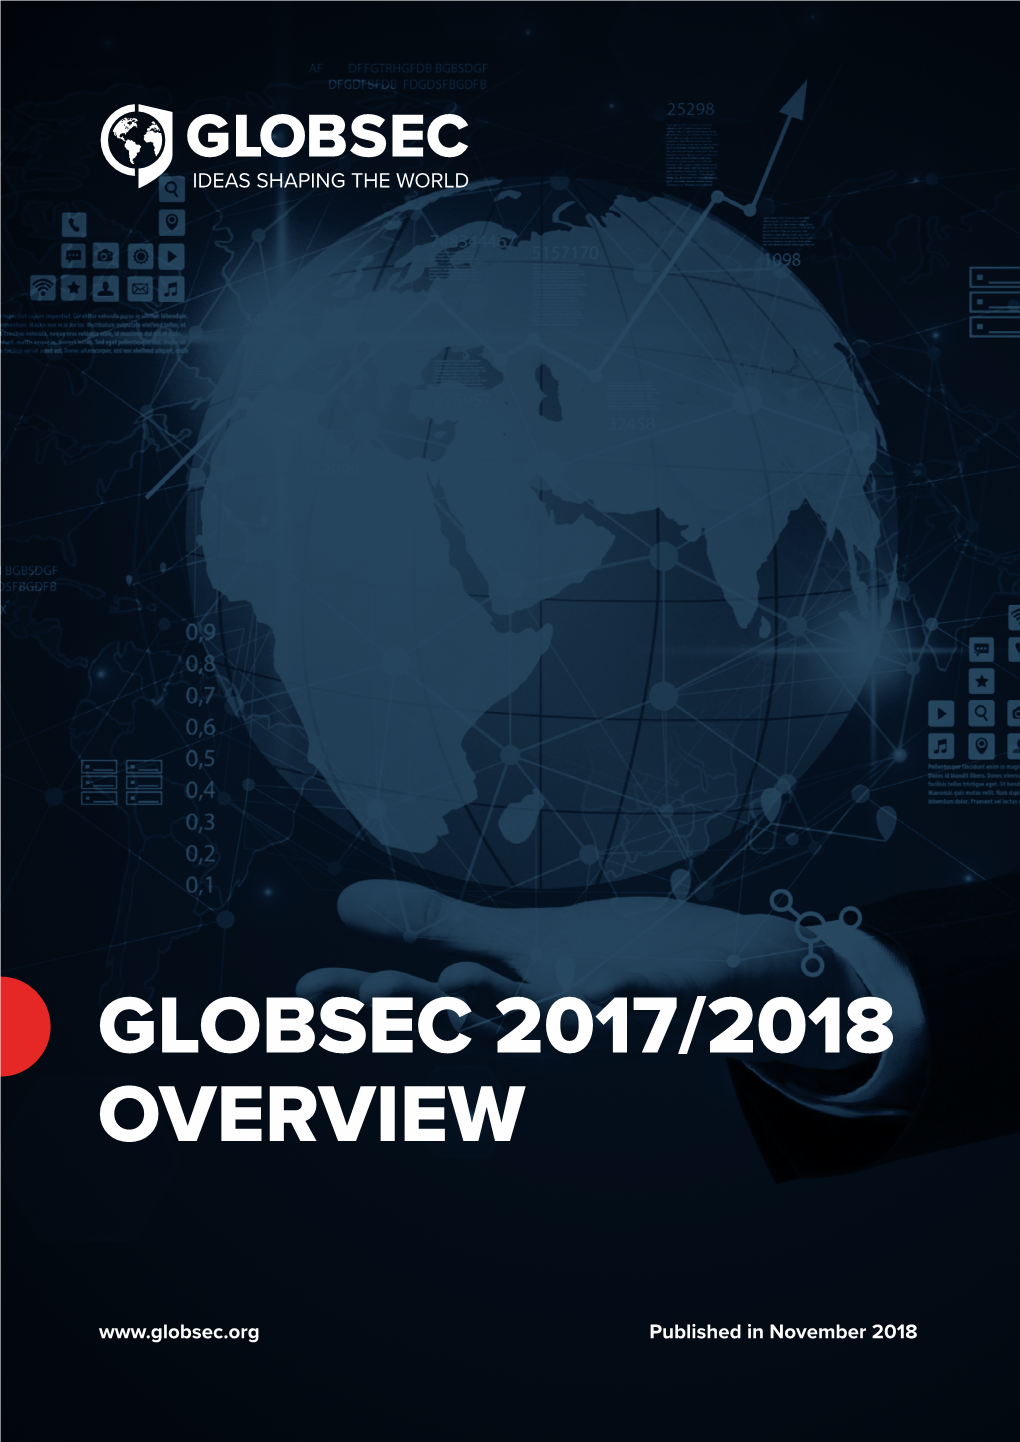 Globsec 2017/2018 Overview